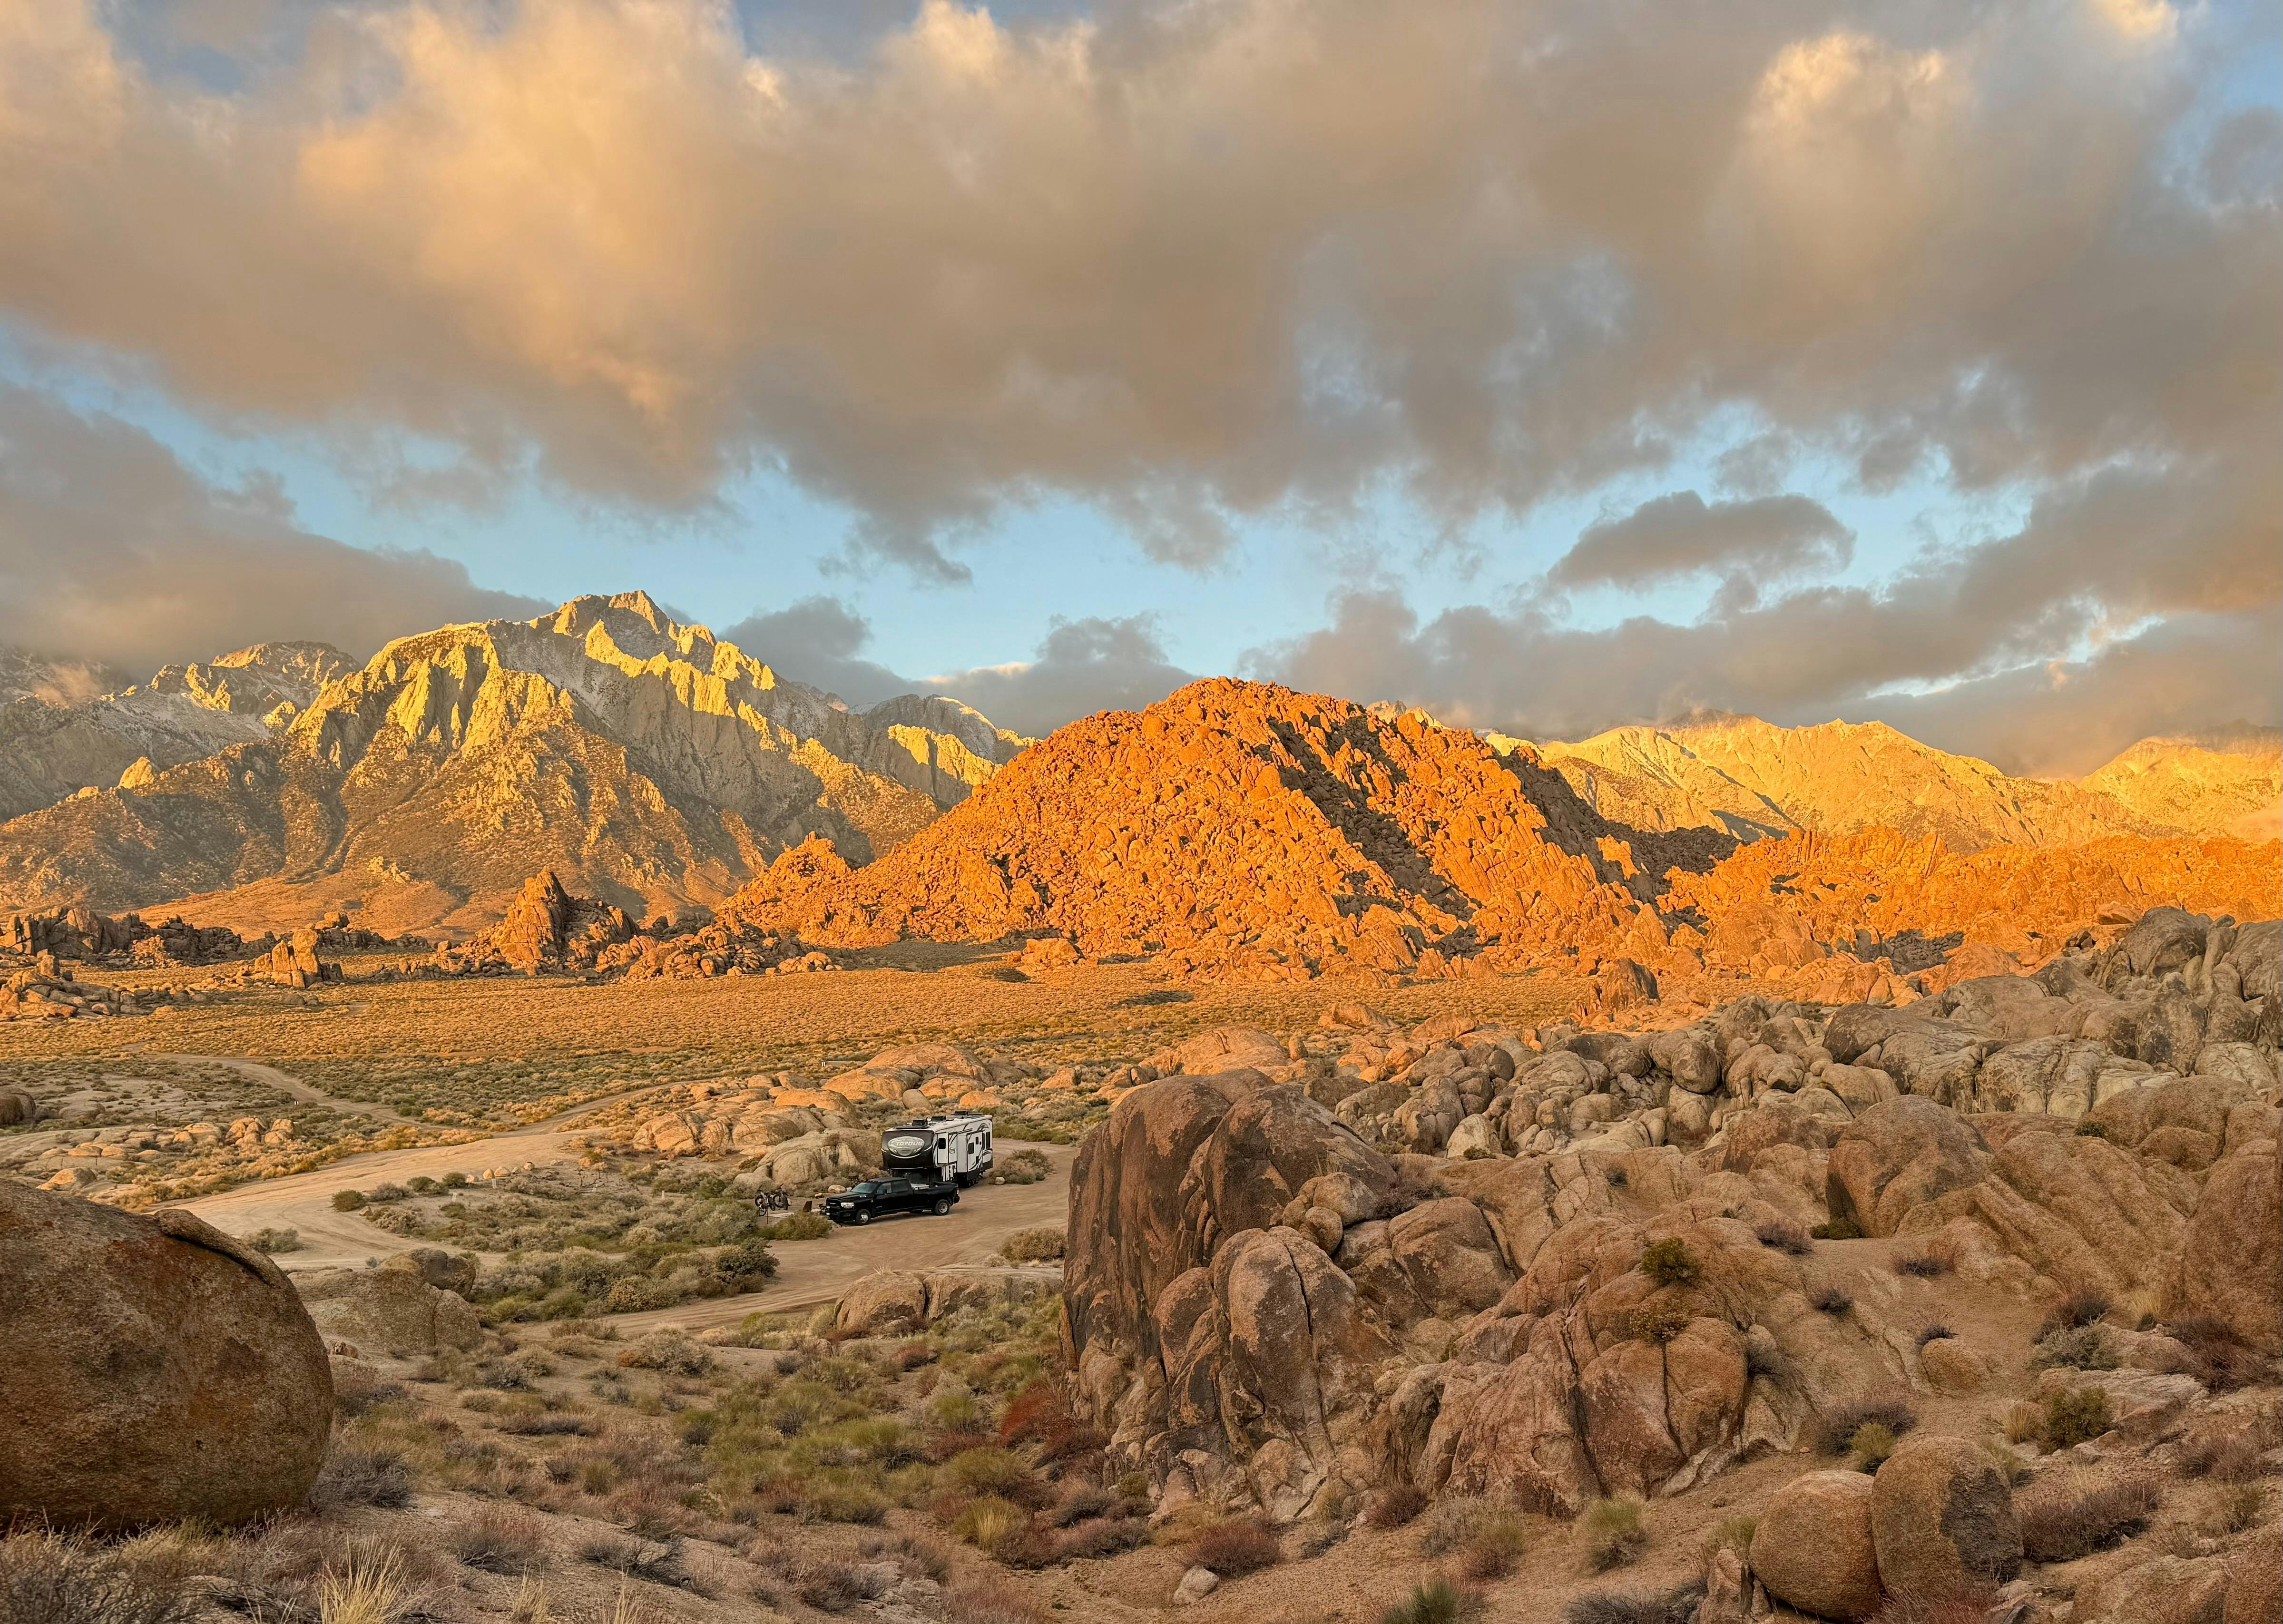 A panoramic desert view at sunset and Melissa and Lucas Lahr's Heartland Torque toy hauler.